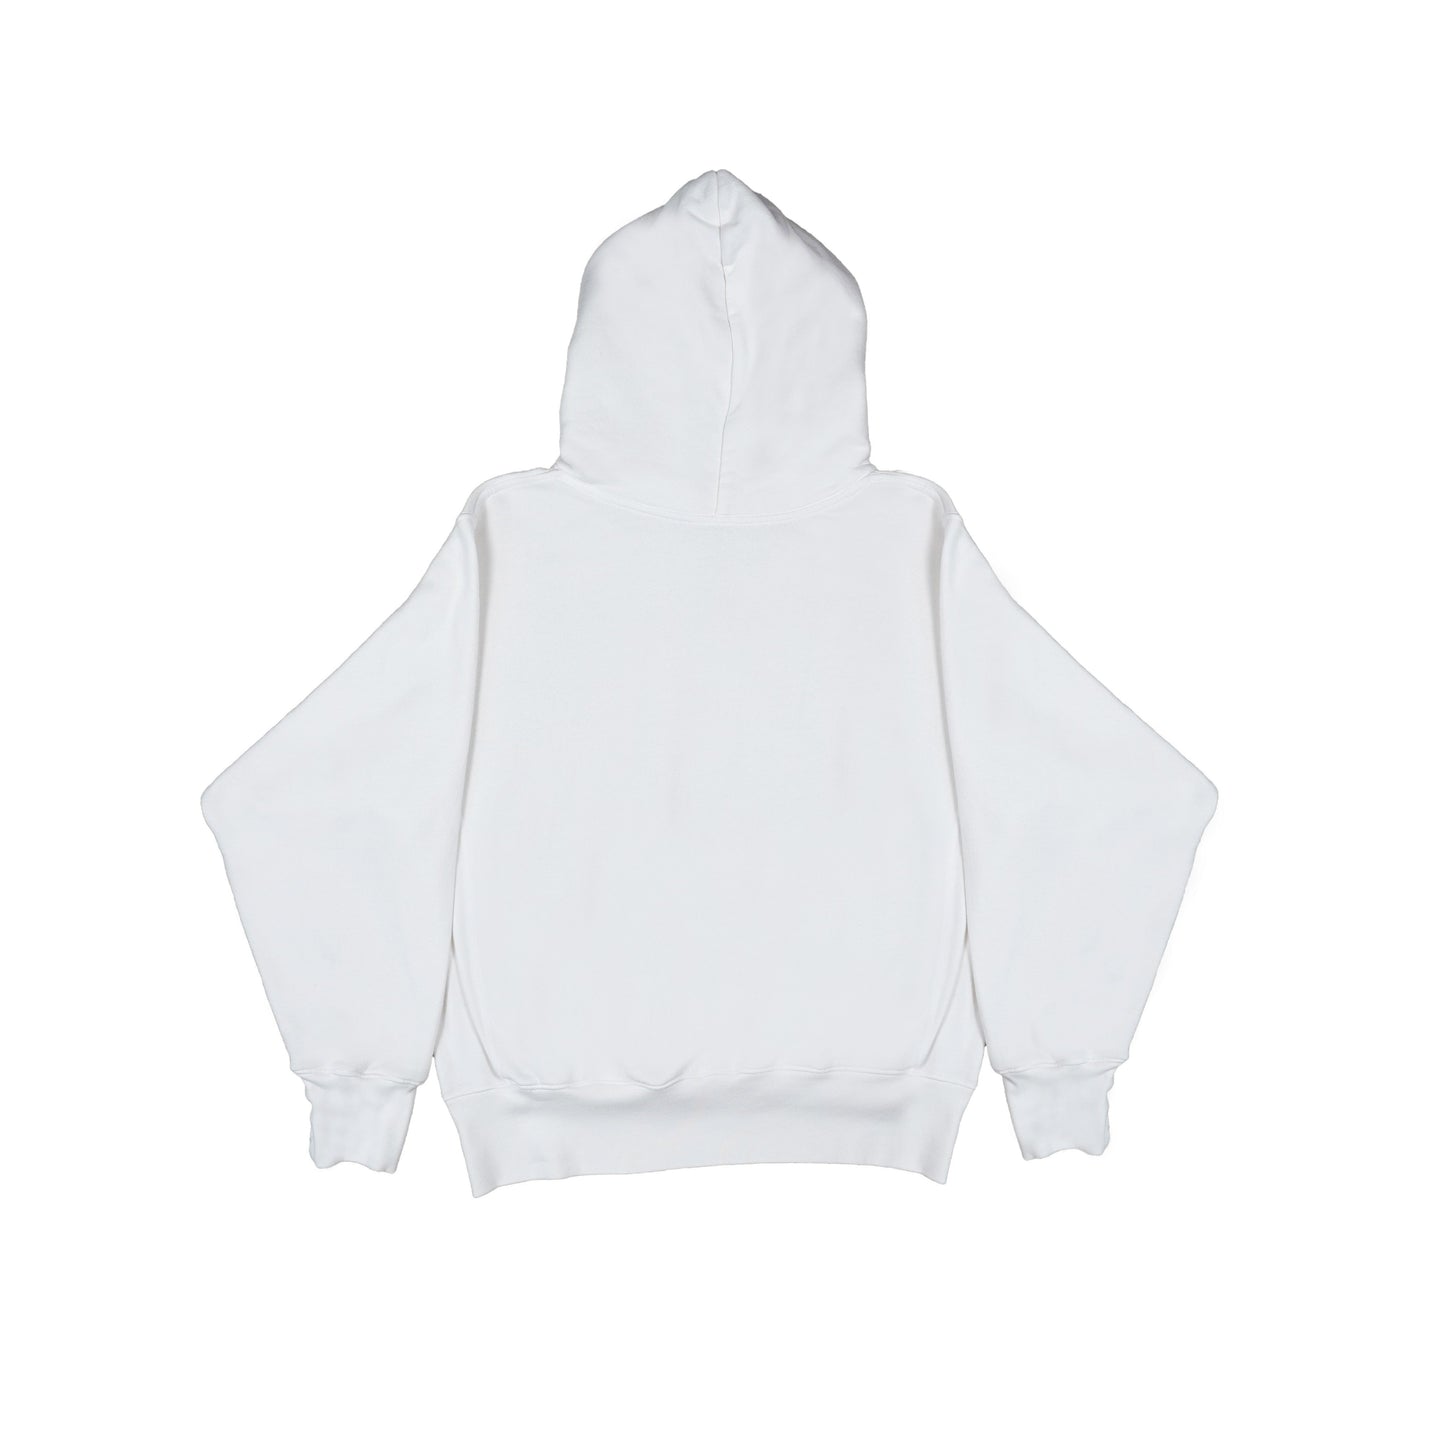 ORGANIC UNISEX HOODIE EXTENDED SIZES- PFD/WHITE